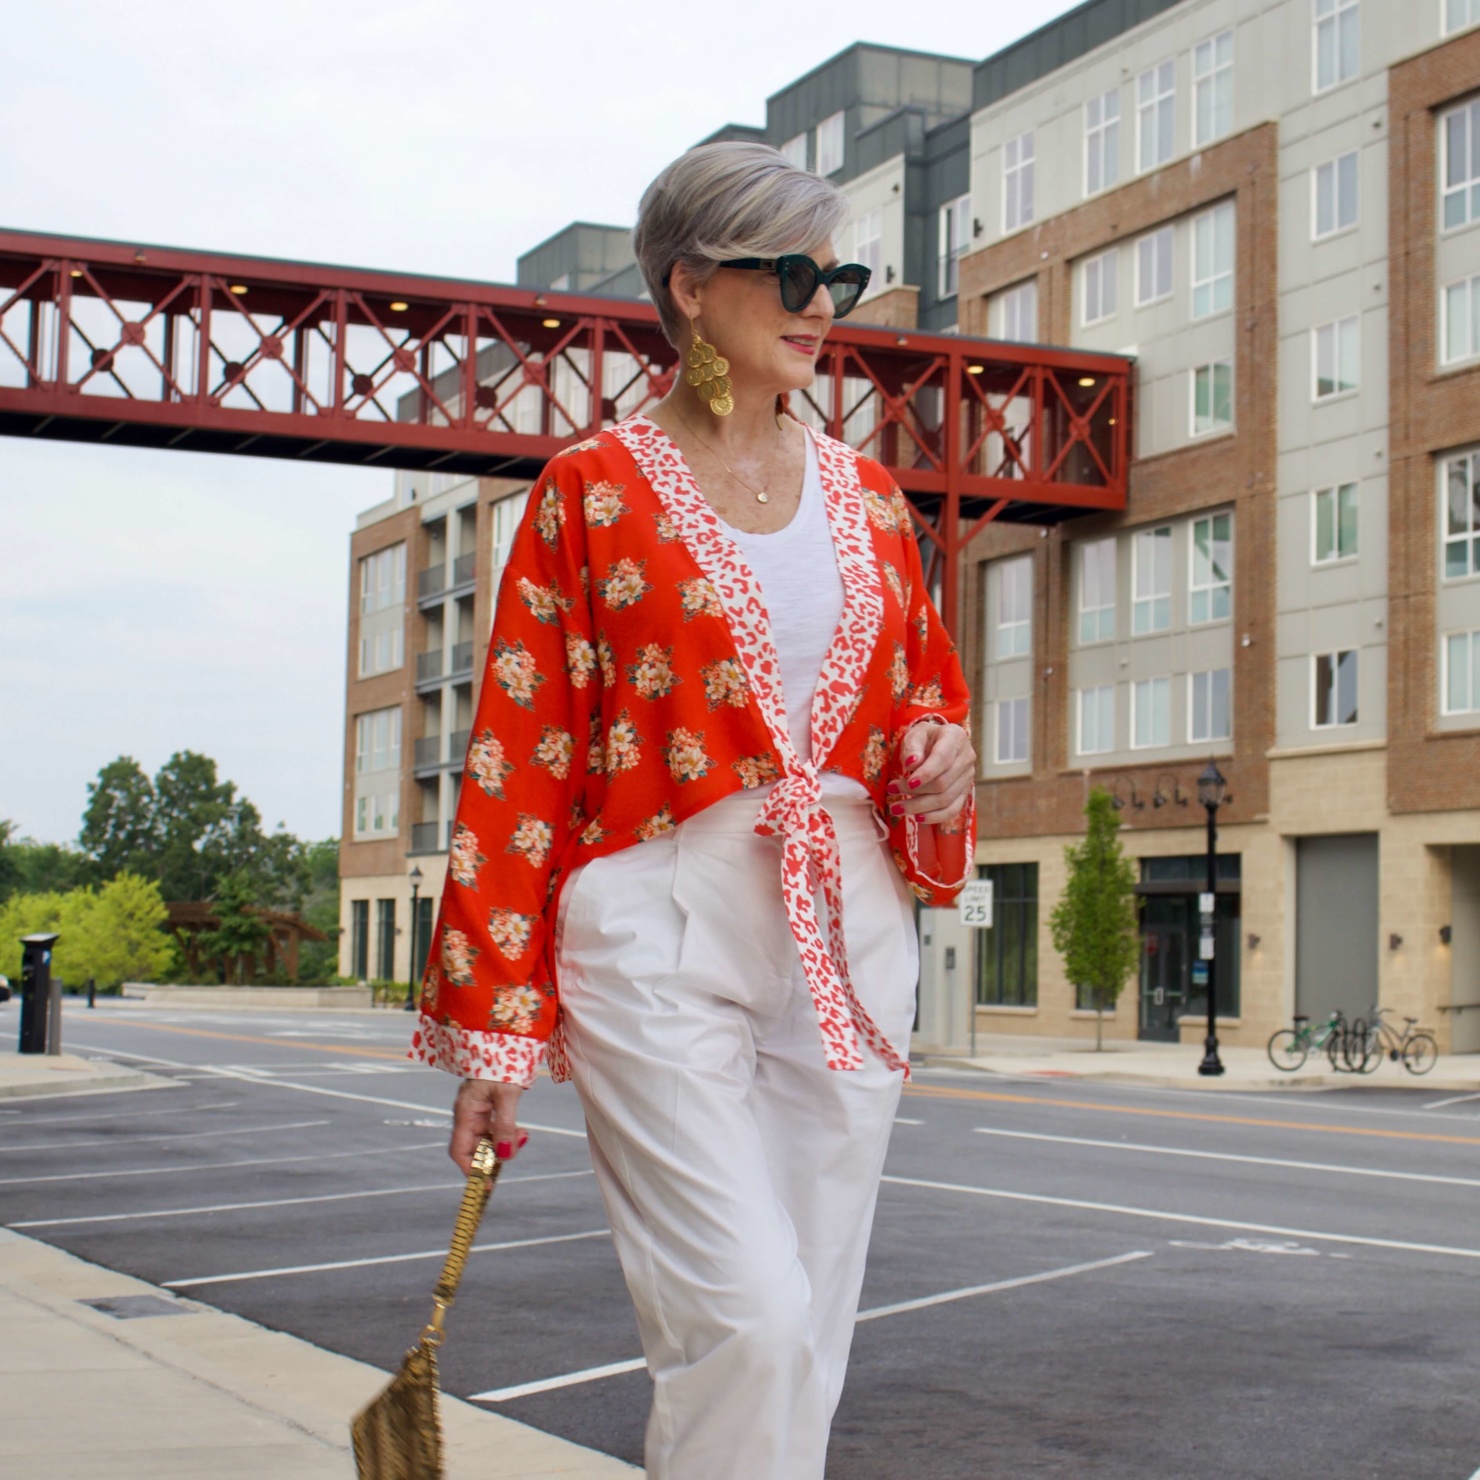 beth from Style at a Certain Age wears a kimono, white cropped chinos, white tee and orange sandals